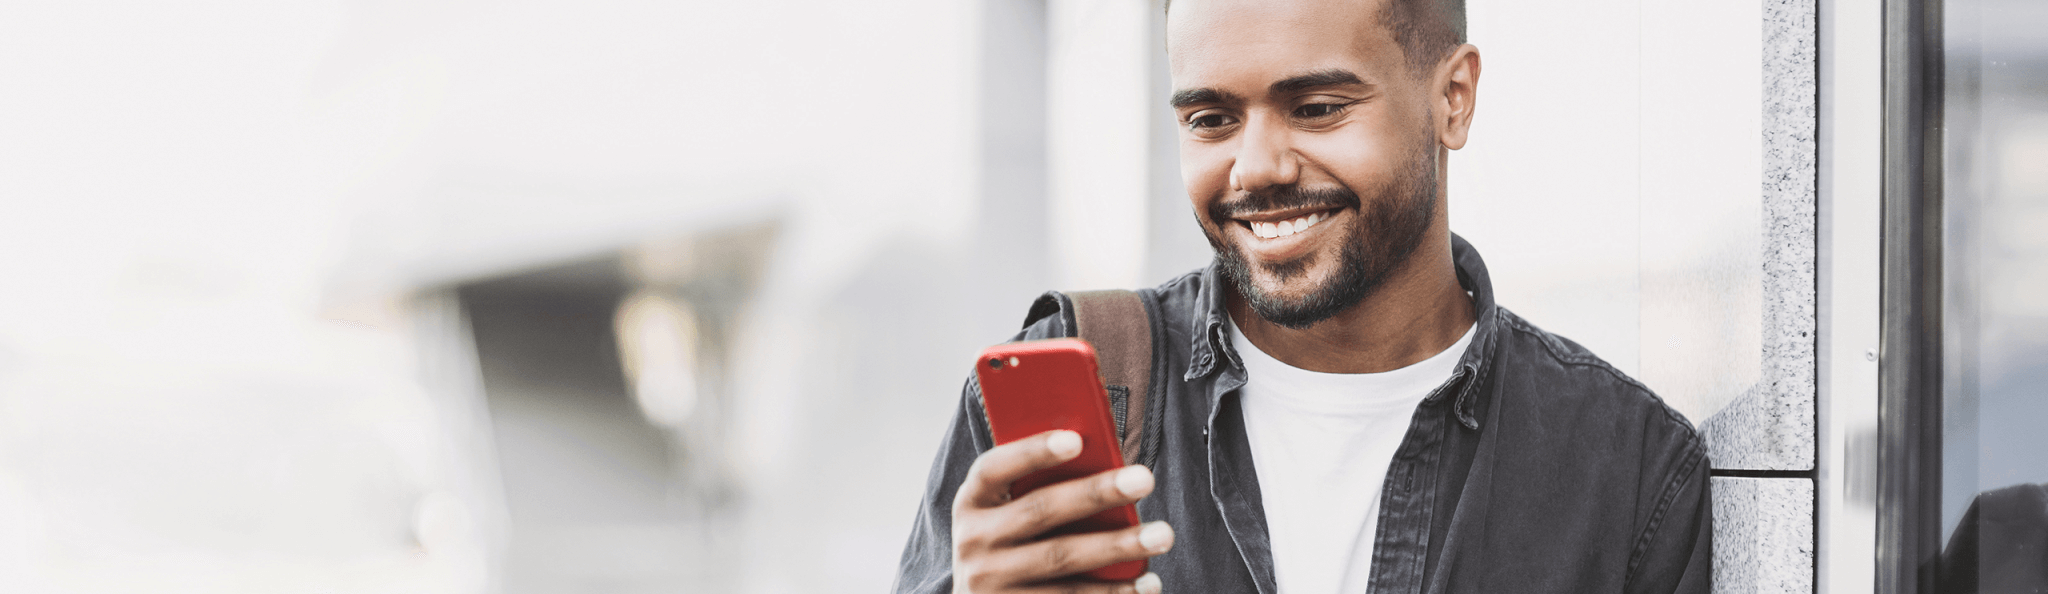 A Step-by-Step Guide on How to Build Texting into Your Customer Journey for a Long-Lasting Relationship